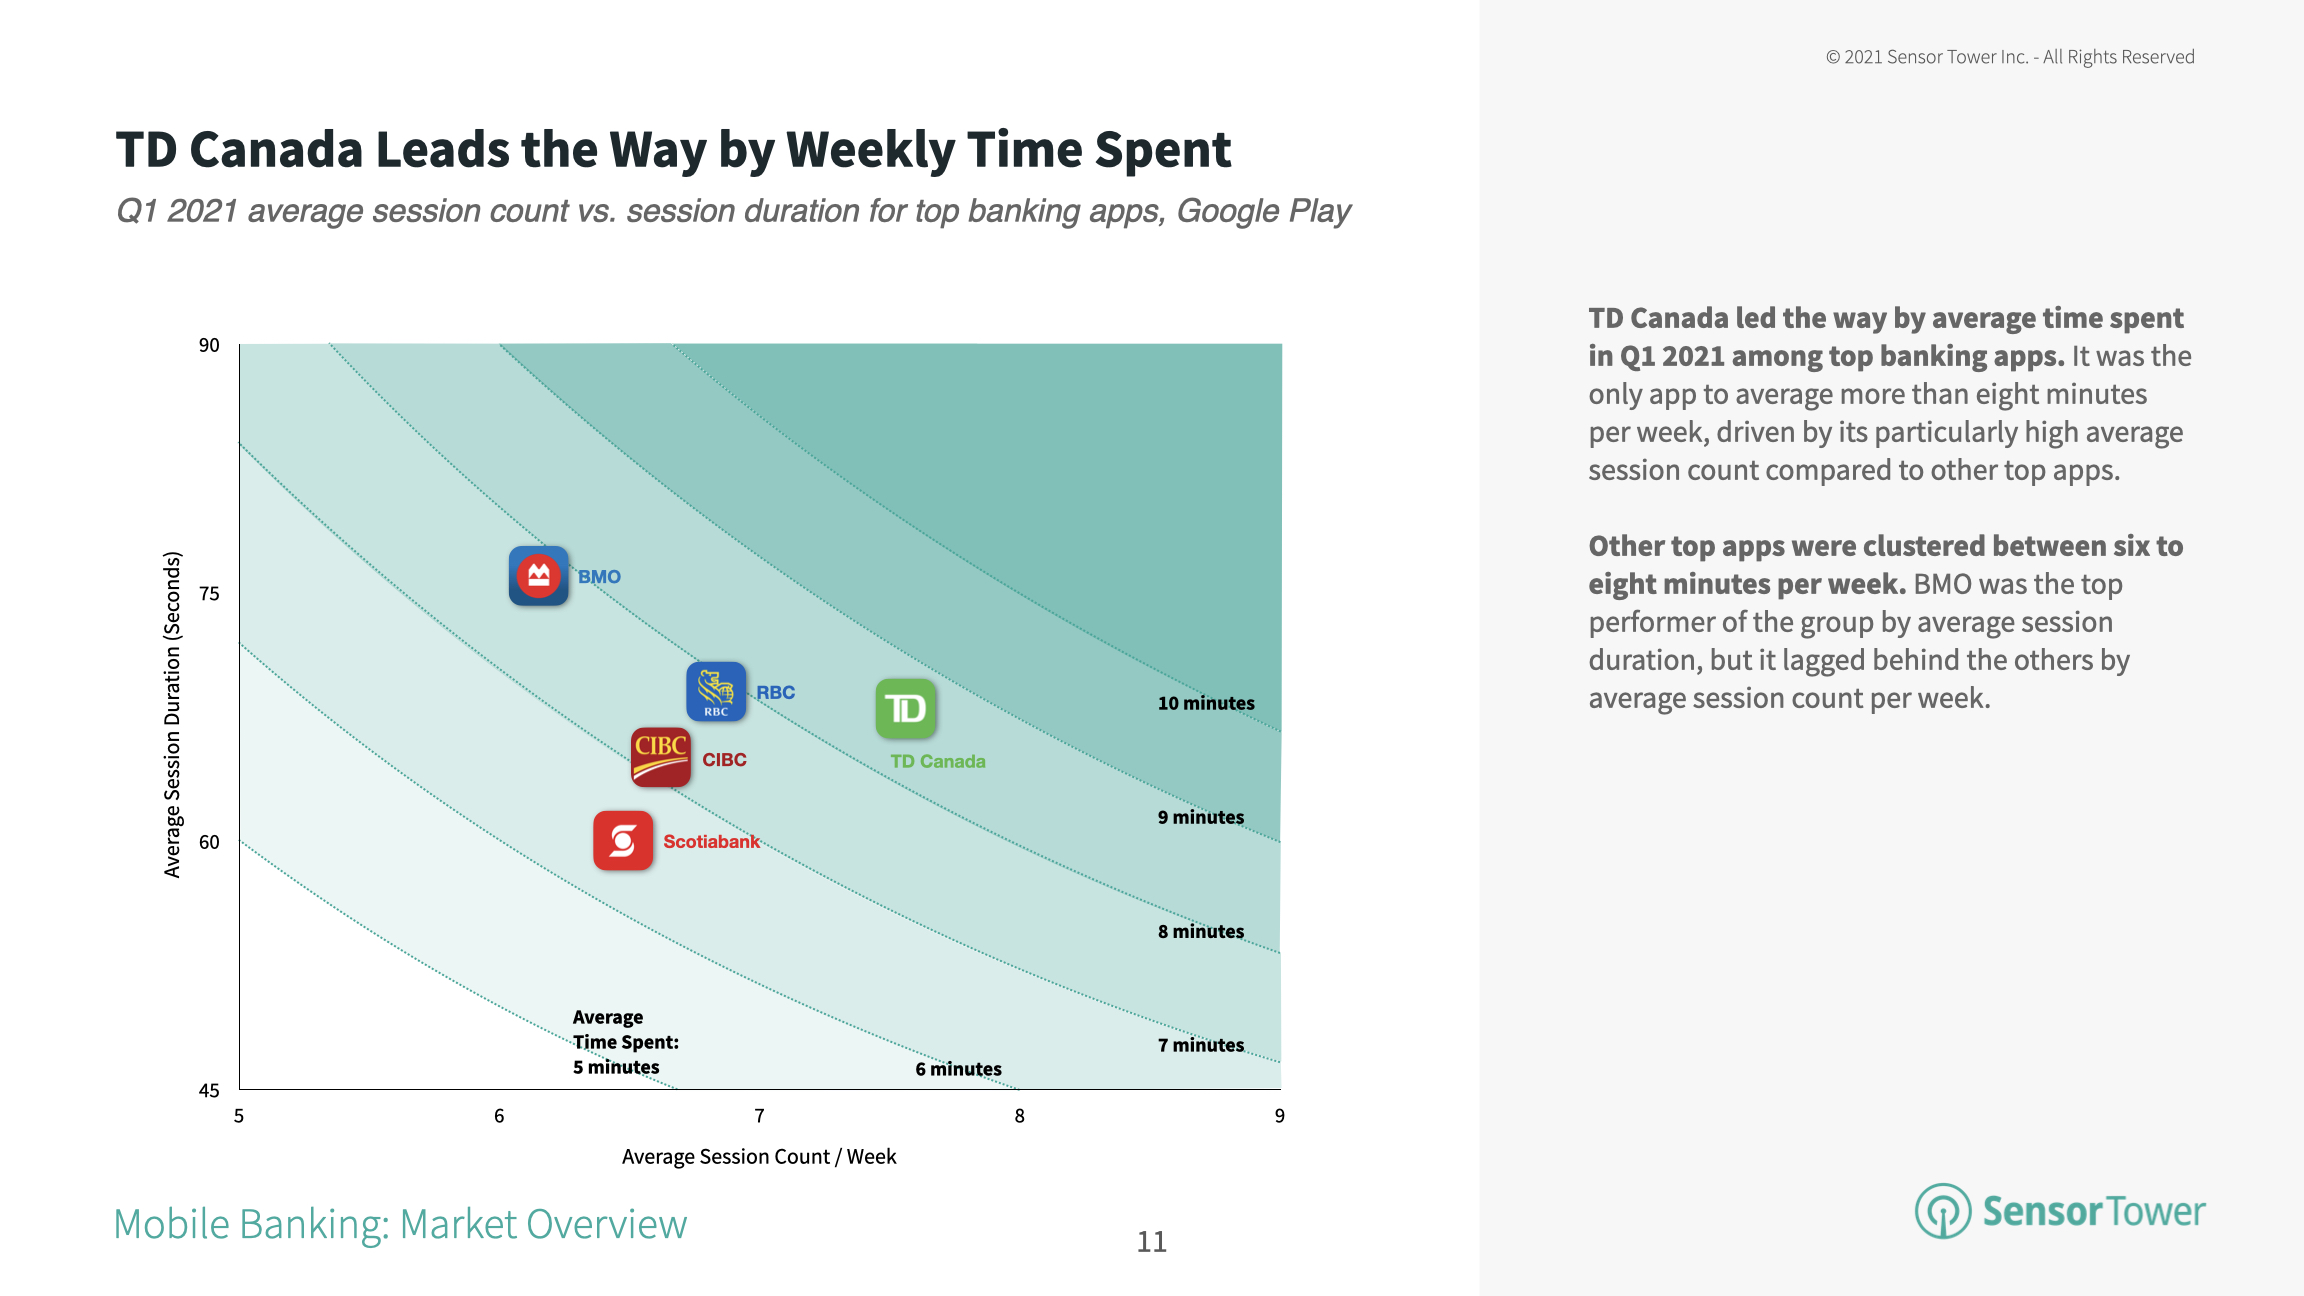 TD Canada led mobile banking with the highest weekly time spent